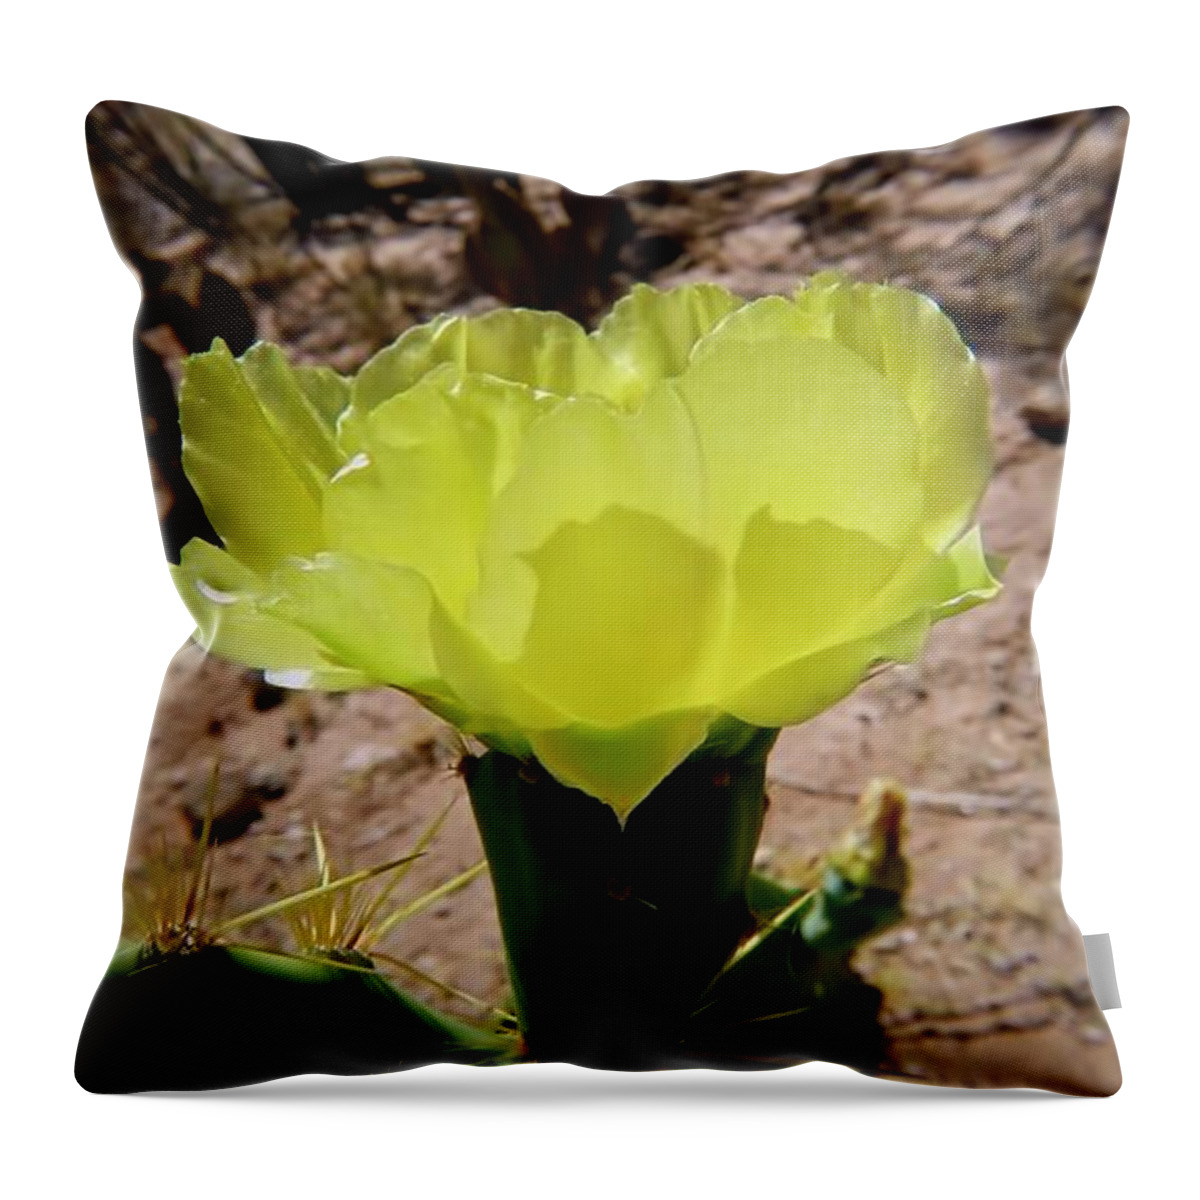 American Southwest Throw Pillow featuring the photograph Desert Bloom by Judy Kennedy